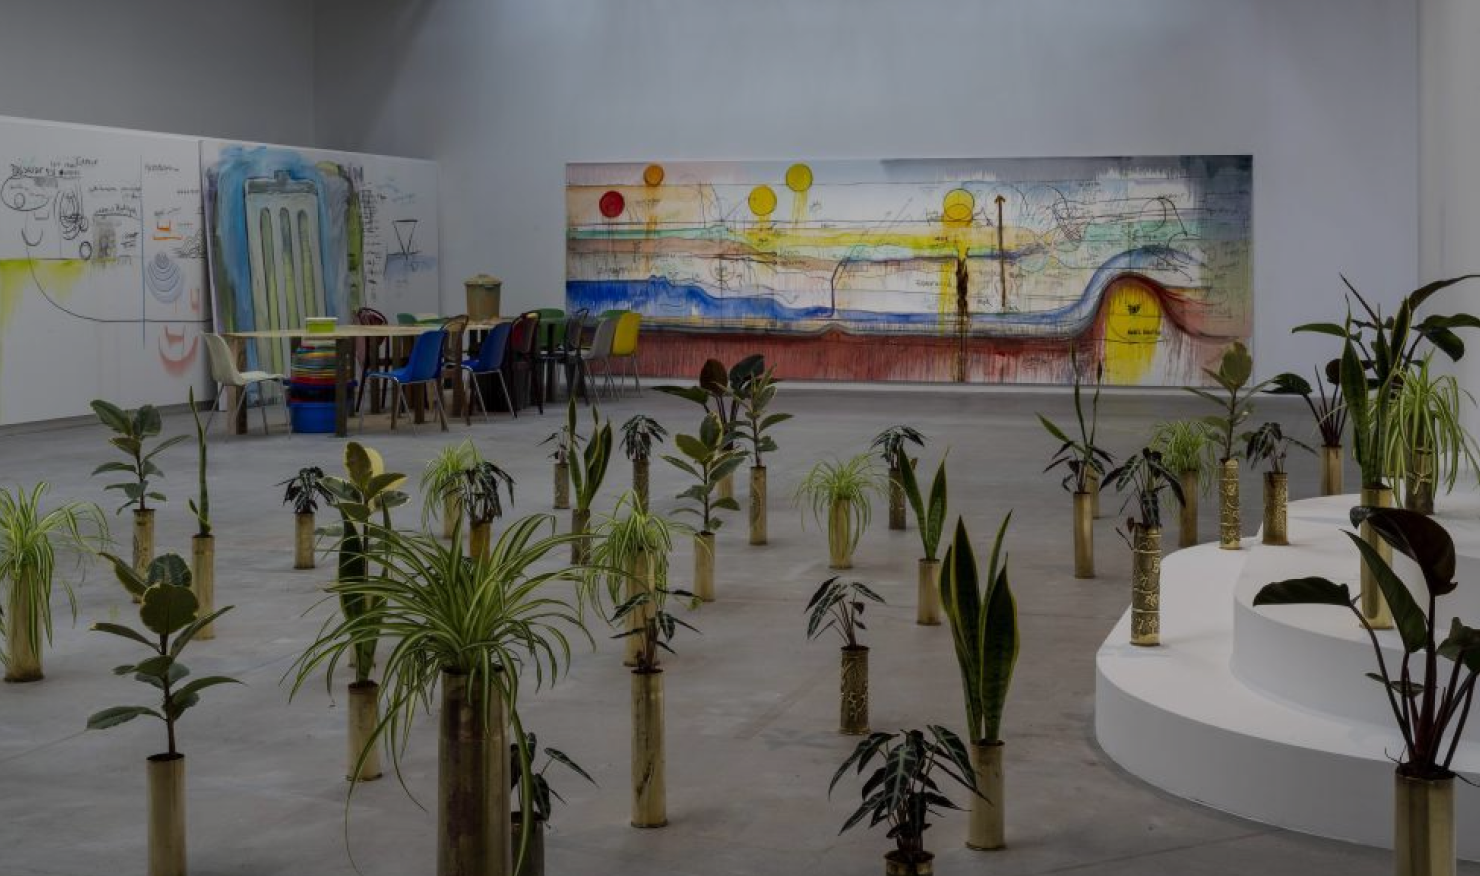 Gallery space with artwork and trees as part of the Our World is Burning Exhibition at Palais de Tokyo in Paris.